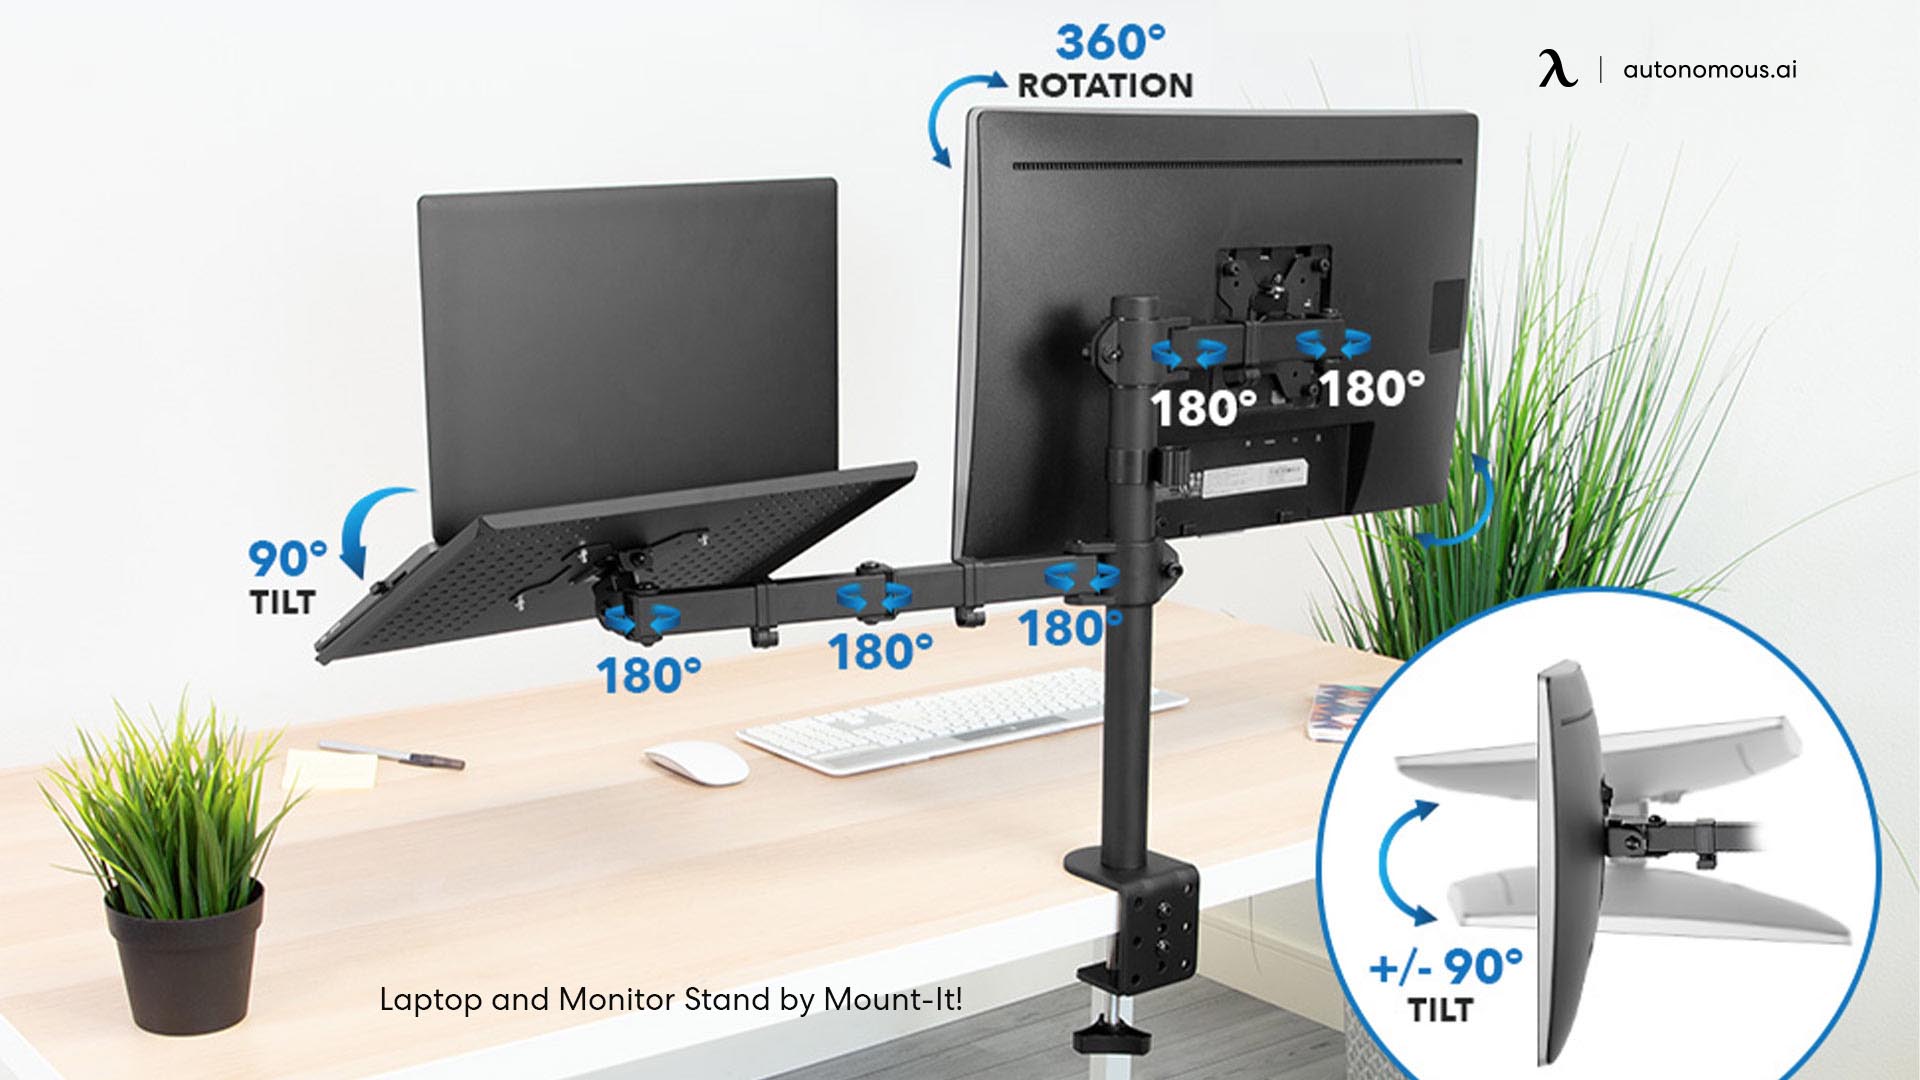 Laptop and Monitor Stand